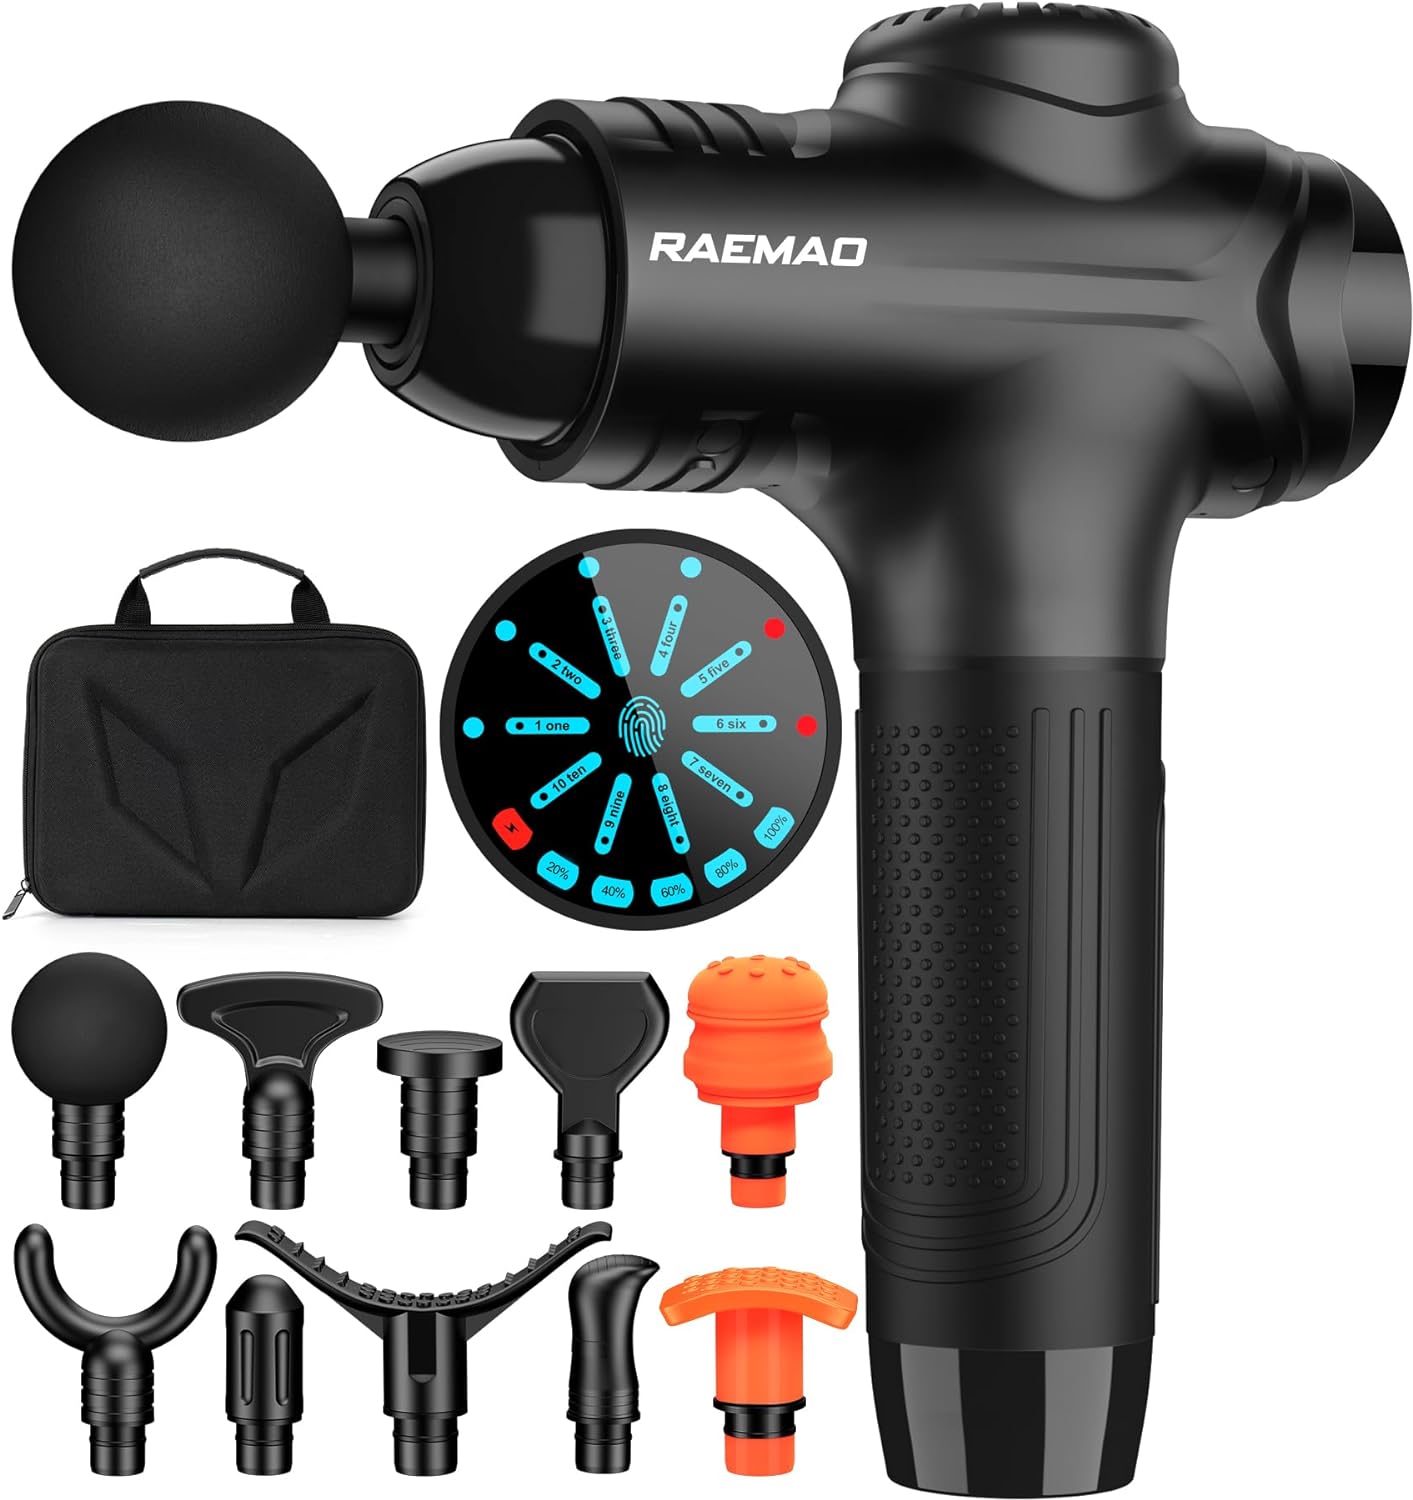 Powerful Massage Gun for Targeted Muscle Relief